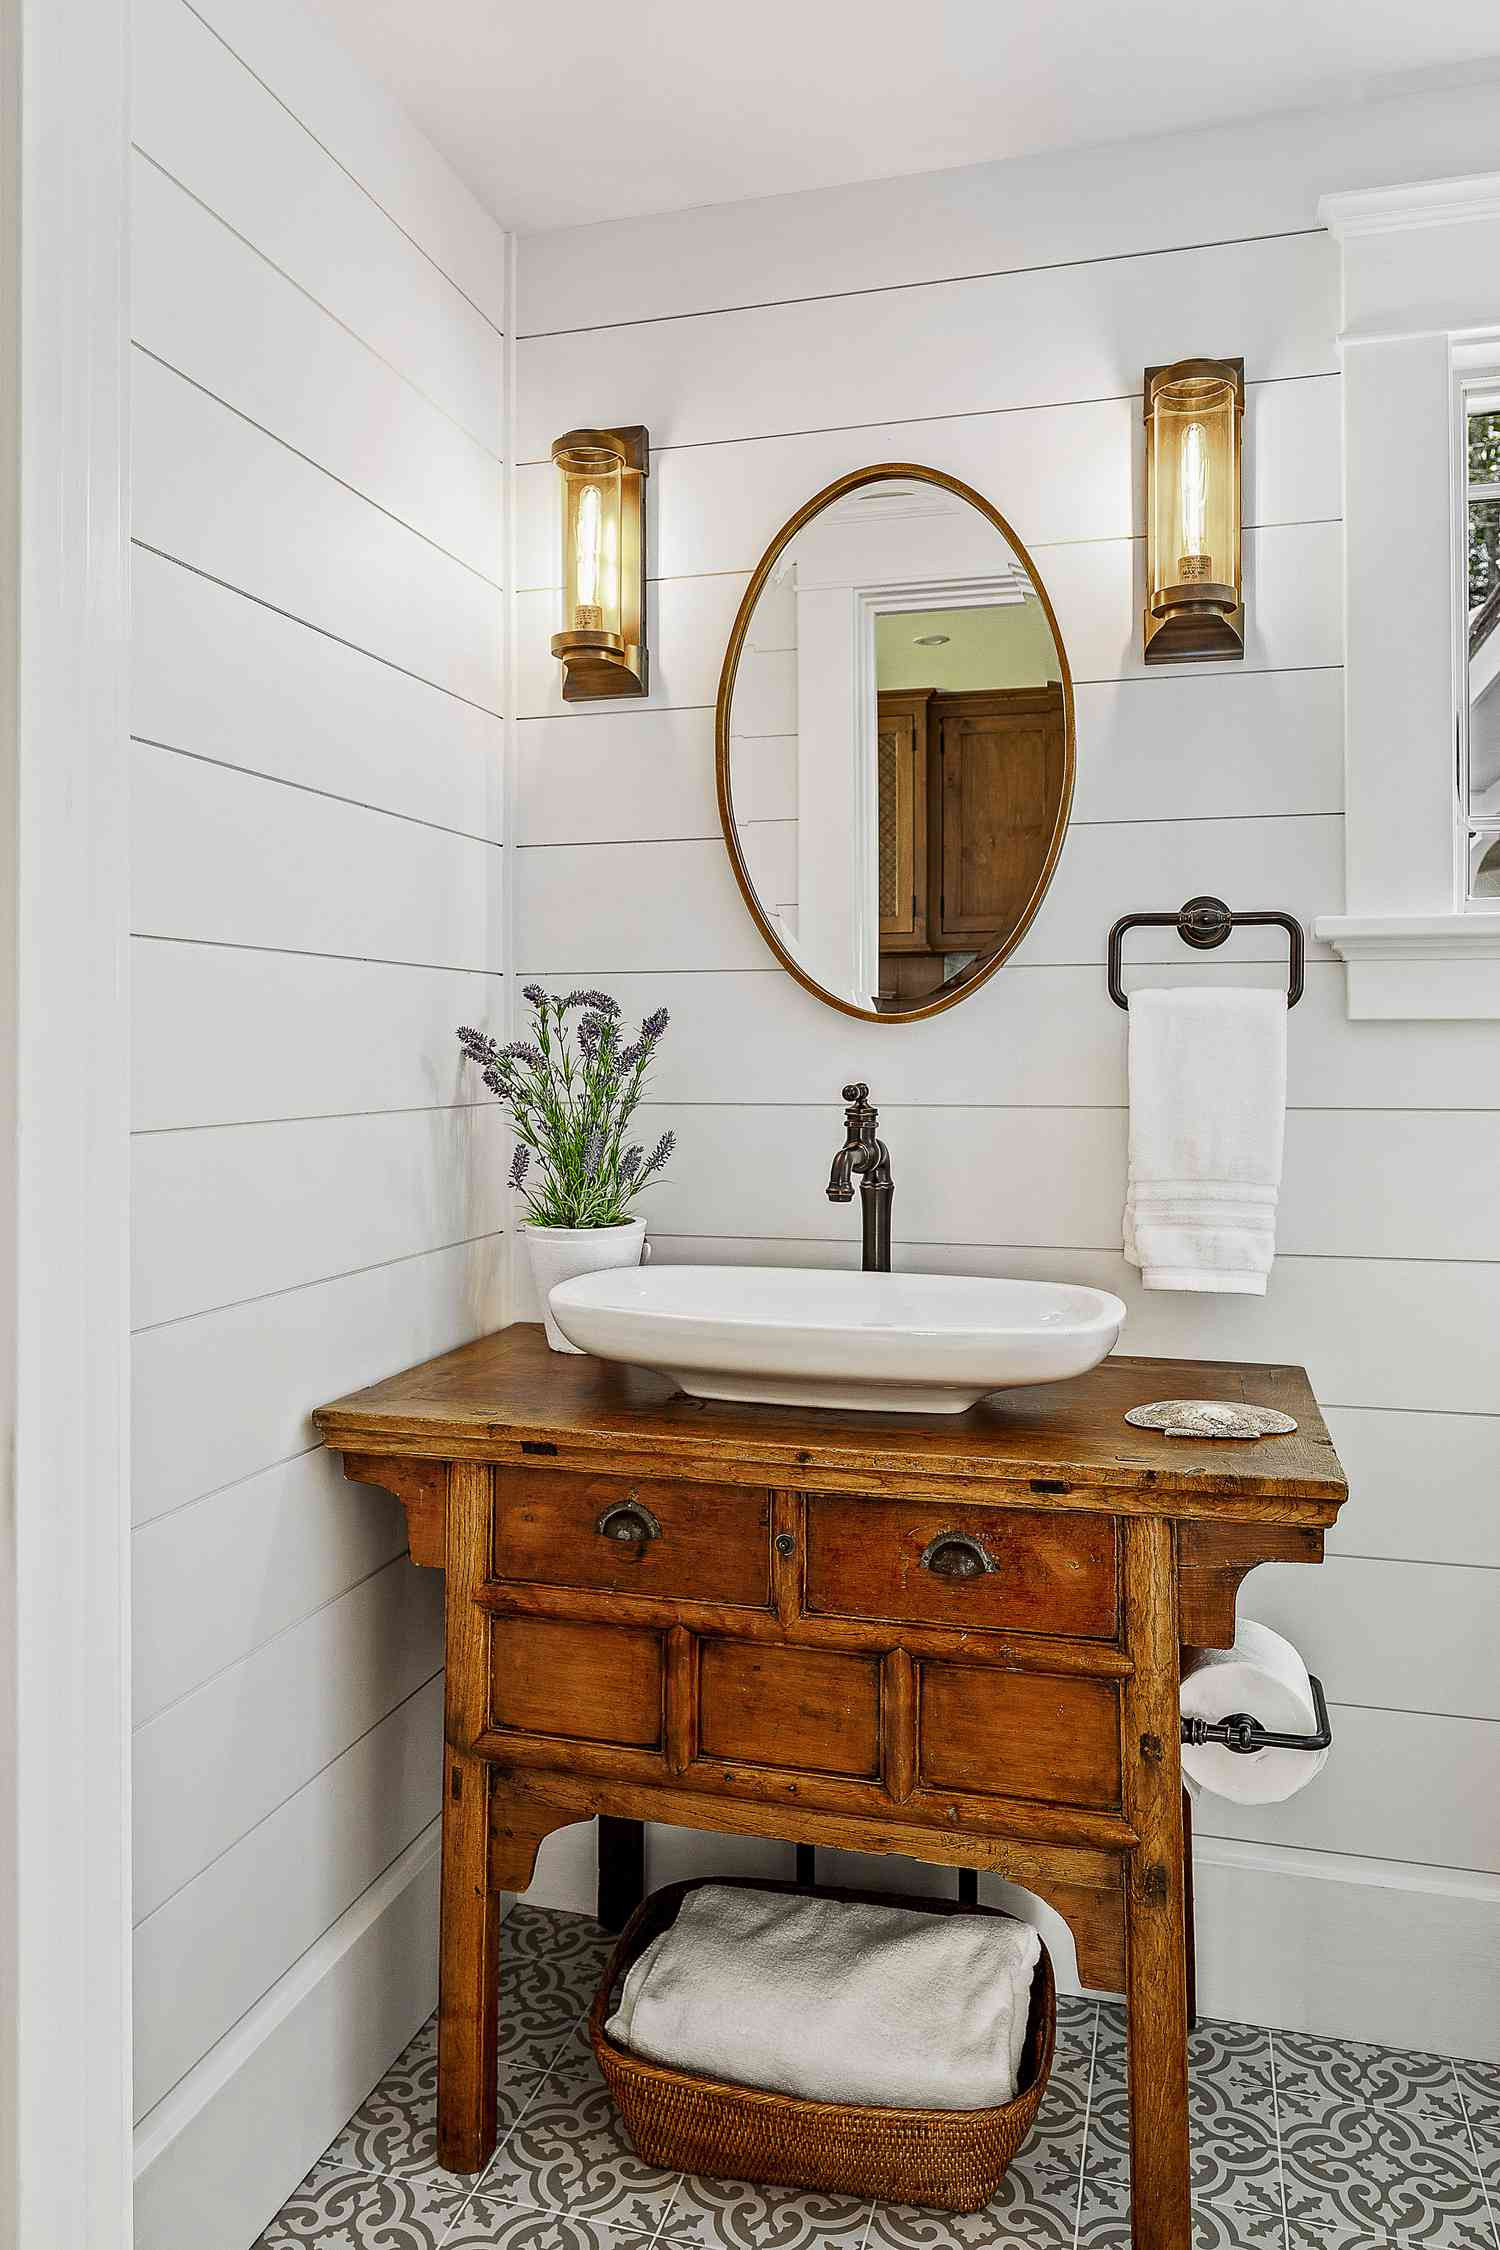 Bathroom Vanity Ideas That Are Stylish and Functional